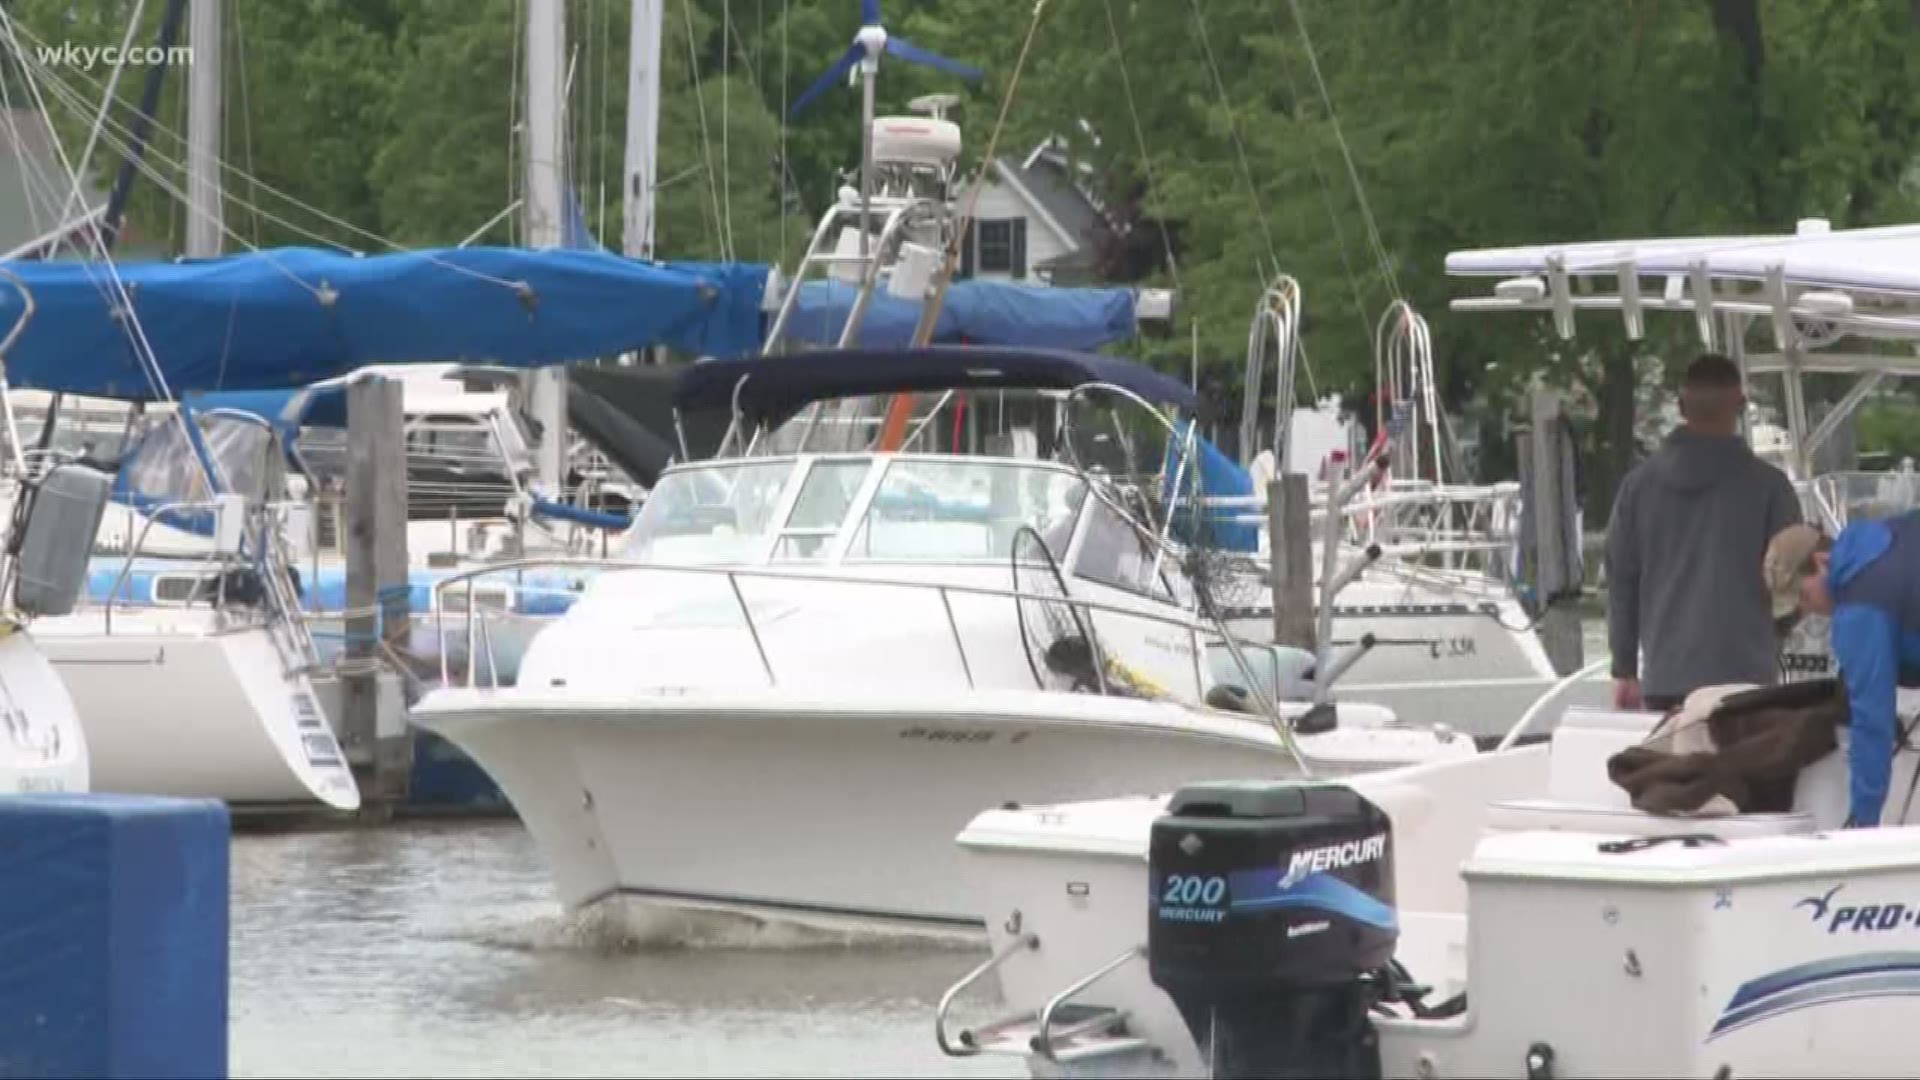 Boating season begins with Lake Erie water levels at record highs